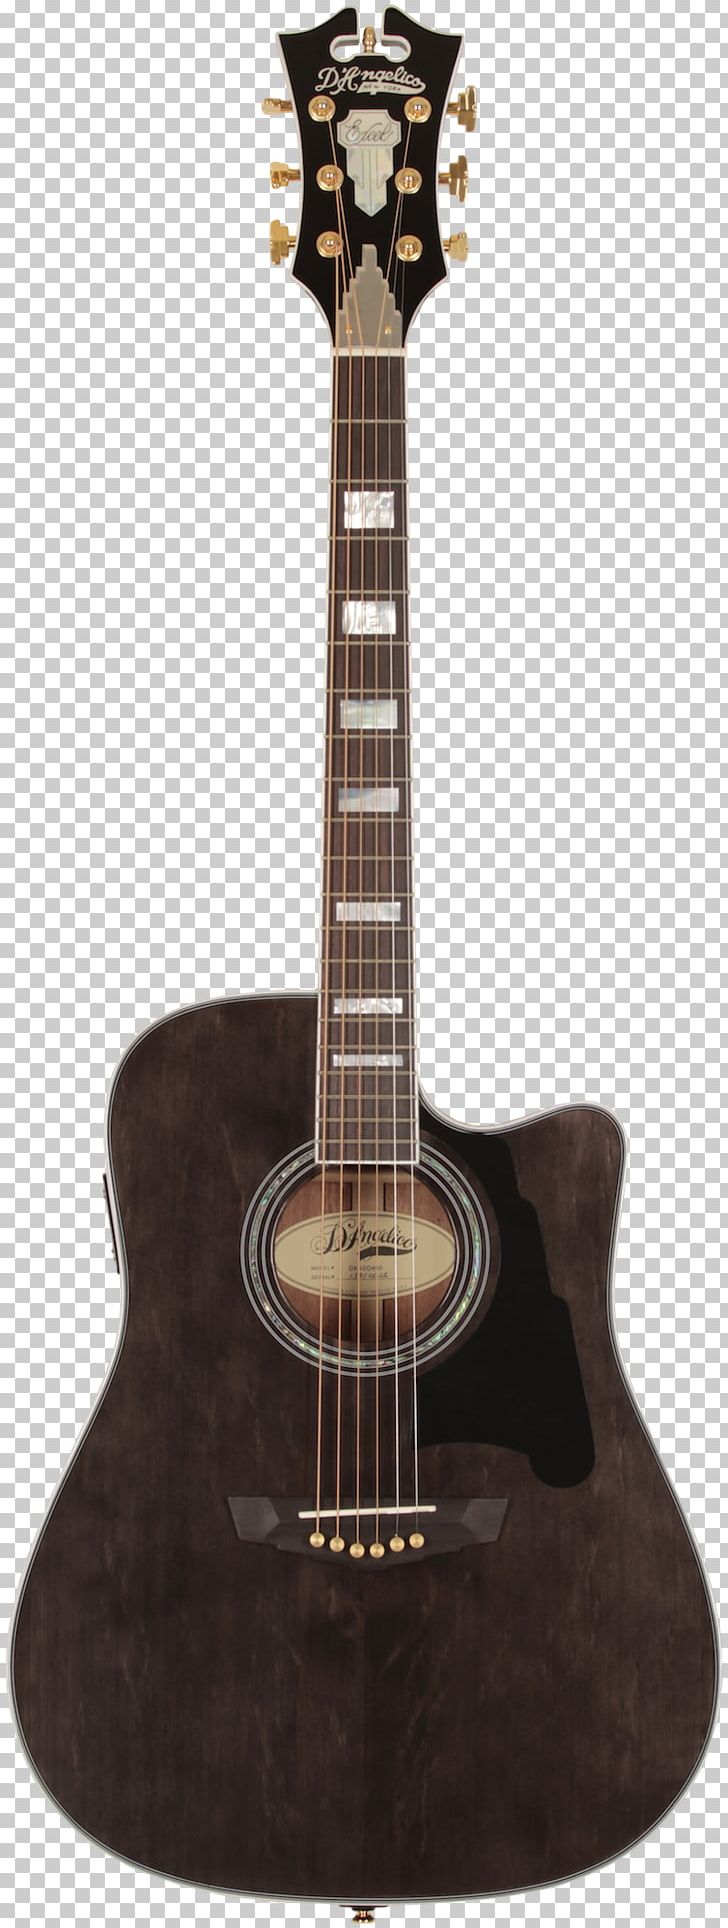 Acoustic-electric Guitar Acoustic Guitar Musical Instruments PNG, Clipart, Acoustic, Archtop Guitar, Cutaway, Guitar Accessory, Musical Instrument Free PNG Download